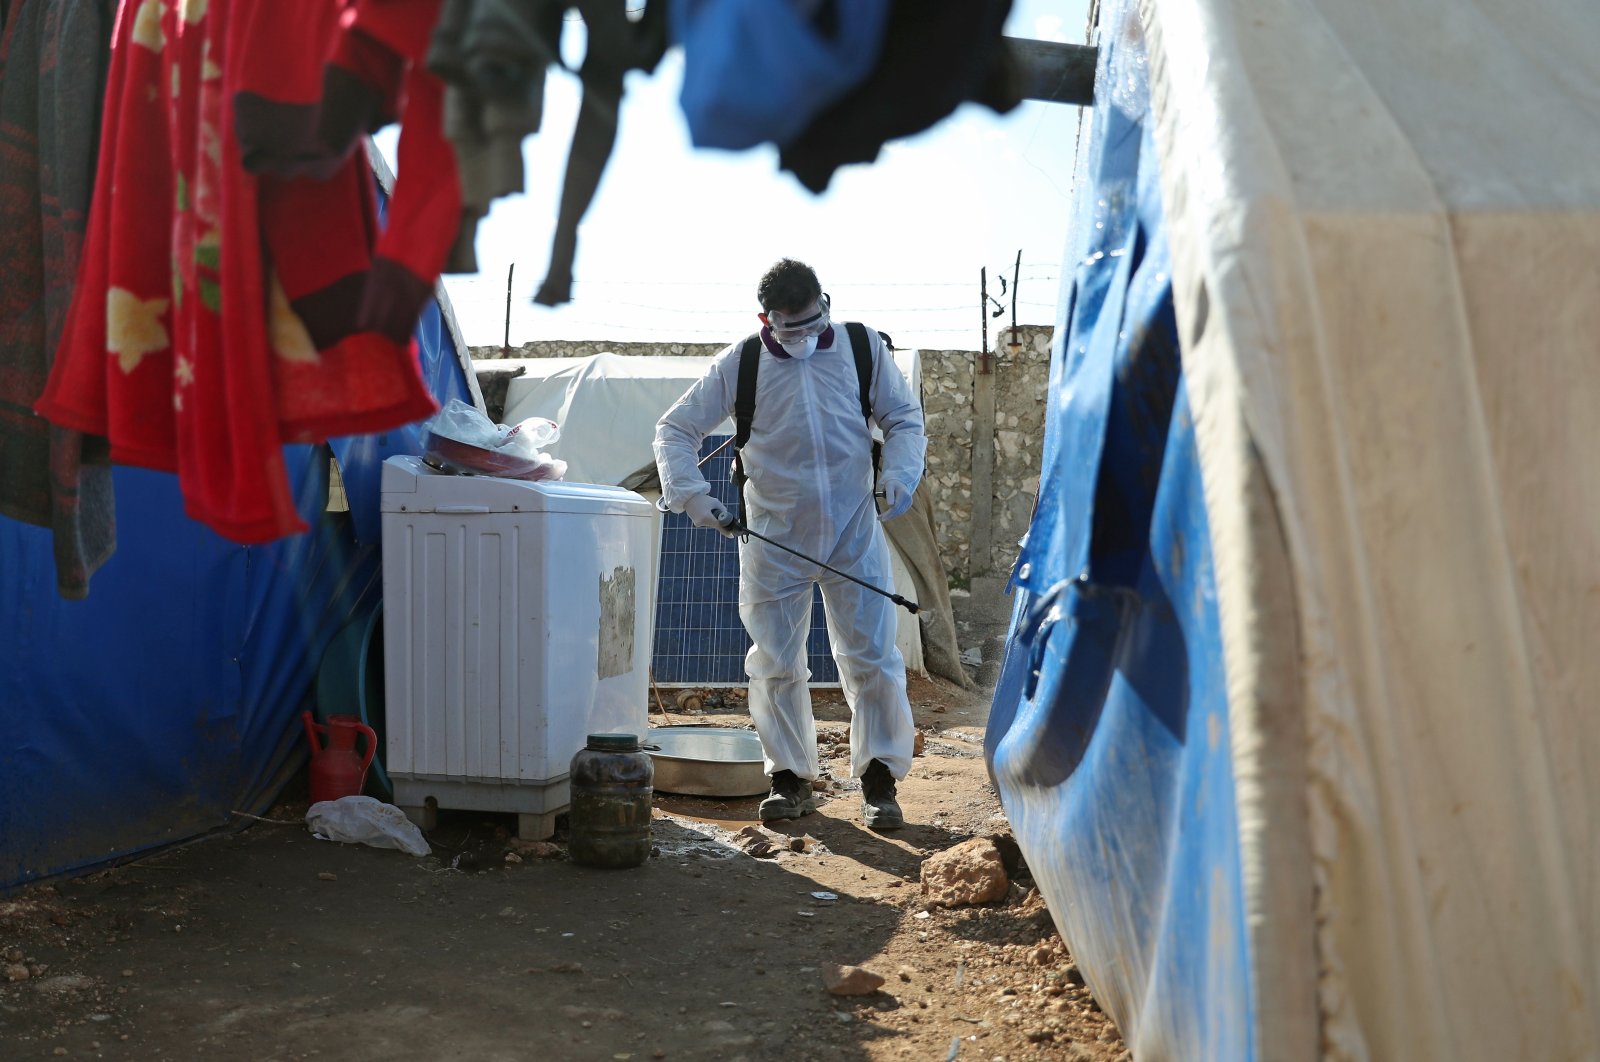 A member of the Syrian Violet NGO disinfects tents at a camp for displaced people in Kafr Jalis village, north of Idlib city, on March 21, 2020, as a preventive measure against the spread of the coronavirus. (AFP Photo)